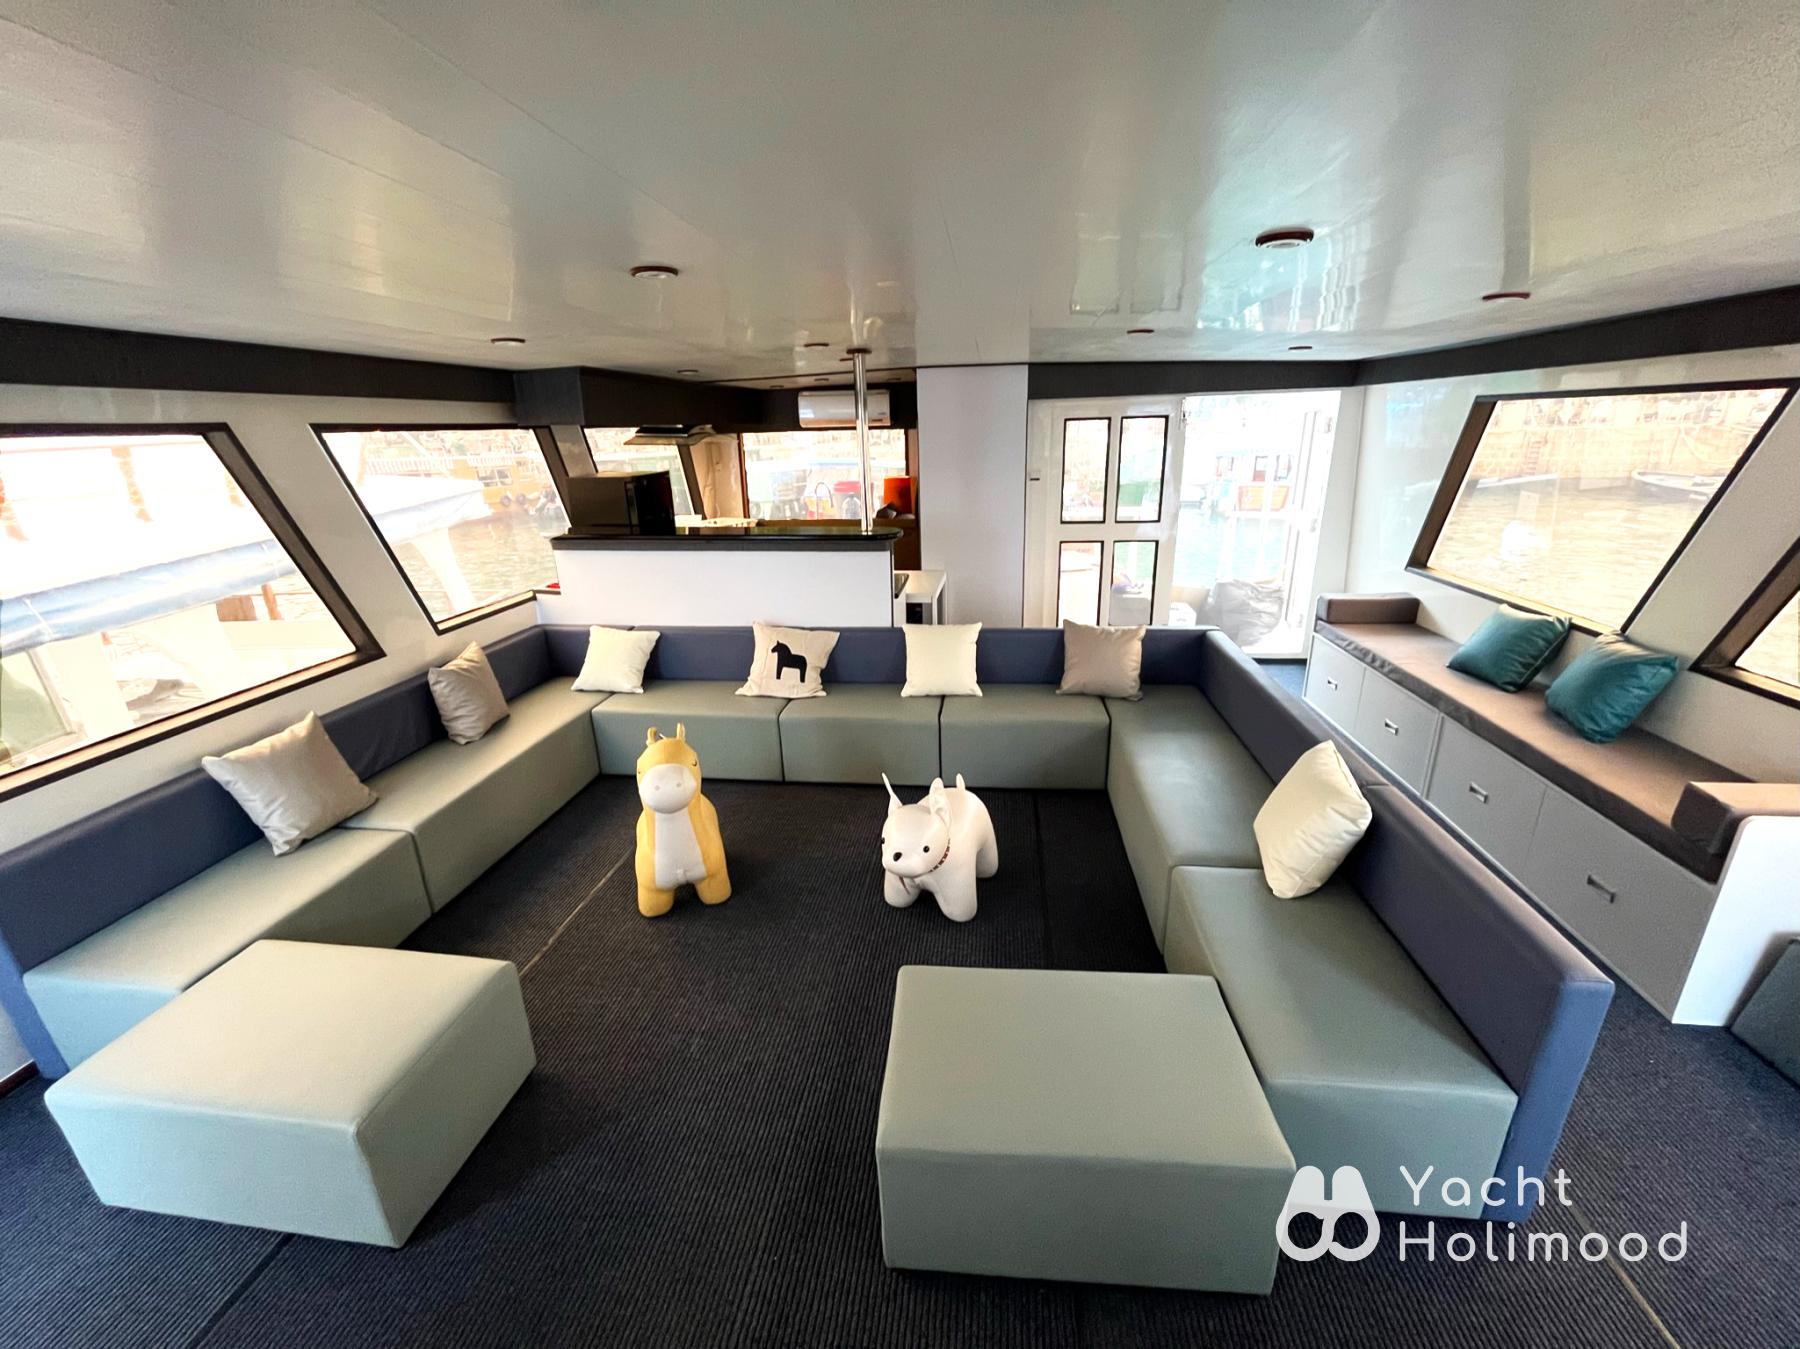 JW01 *The first choice for parents and children (equipped with life jackets and game equipment for children aged 3~12) feature Sai Kung Spacious House Boat （Swimming Pool & Wakesurfing options ava.) 1